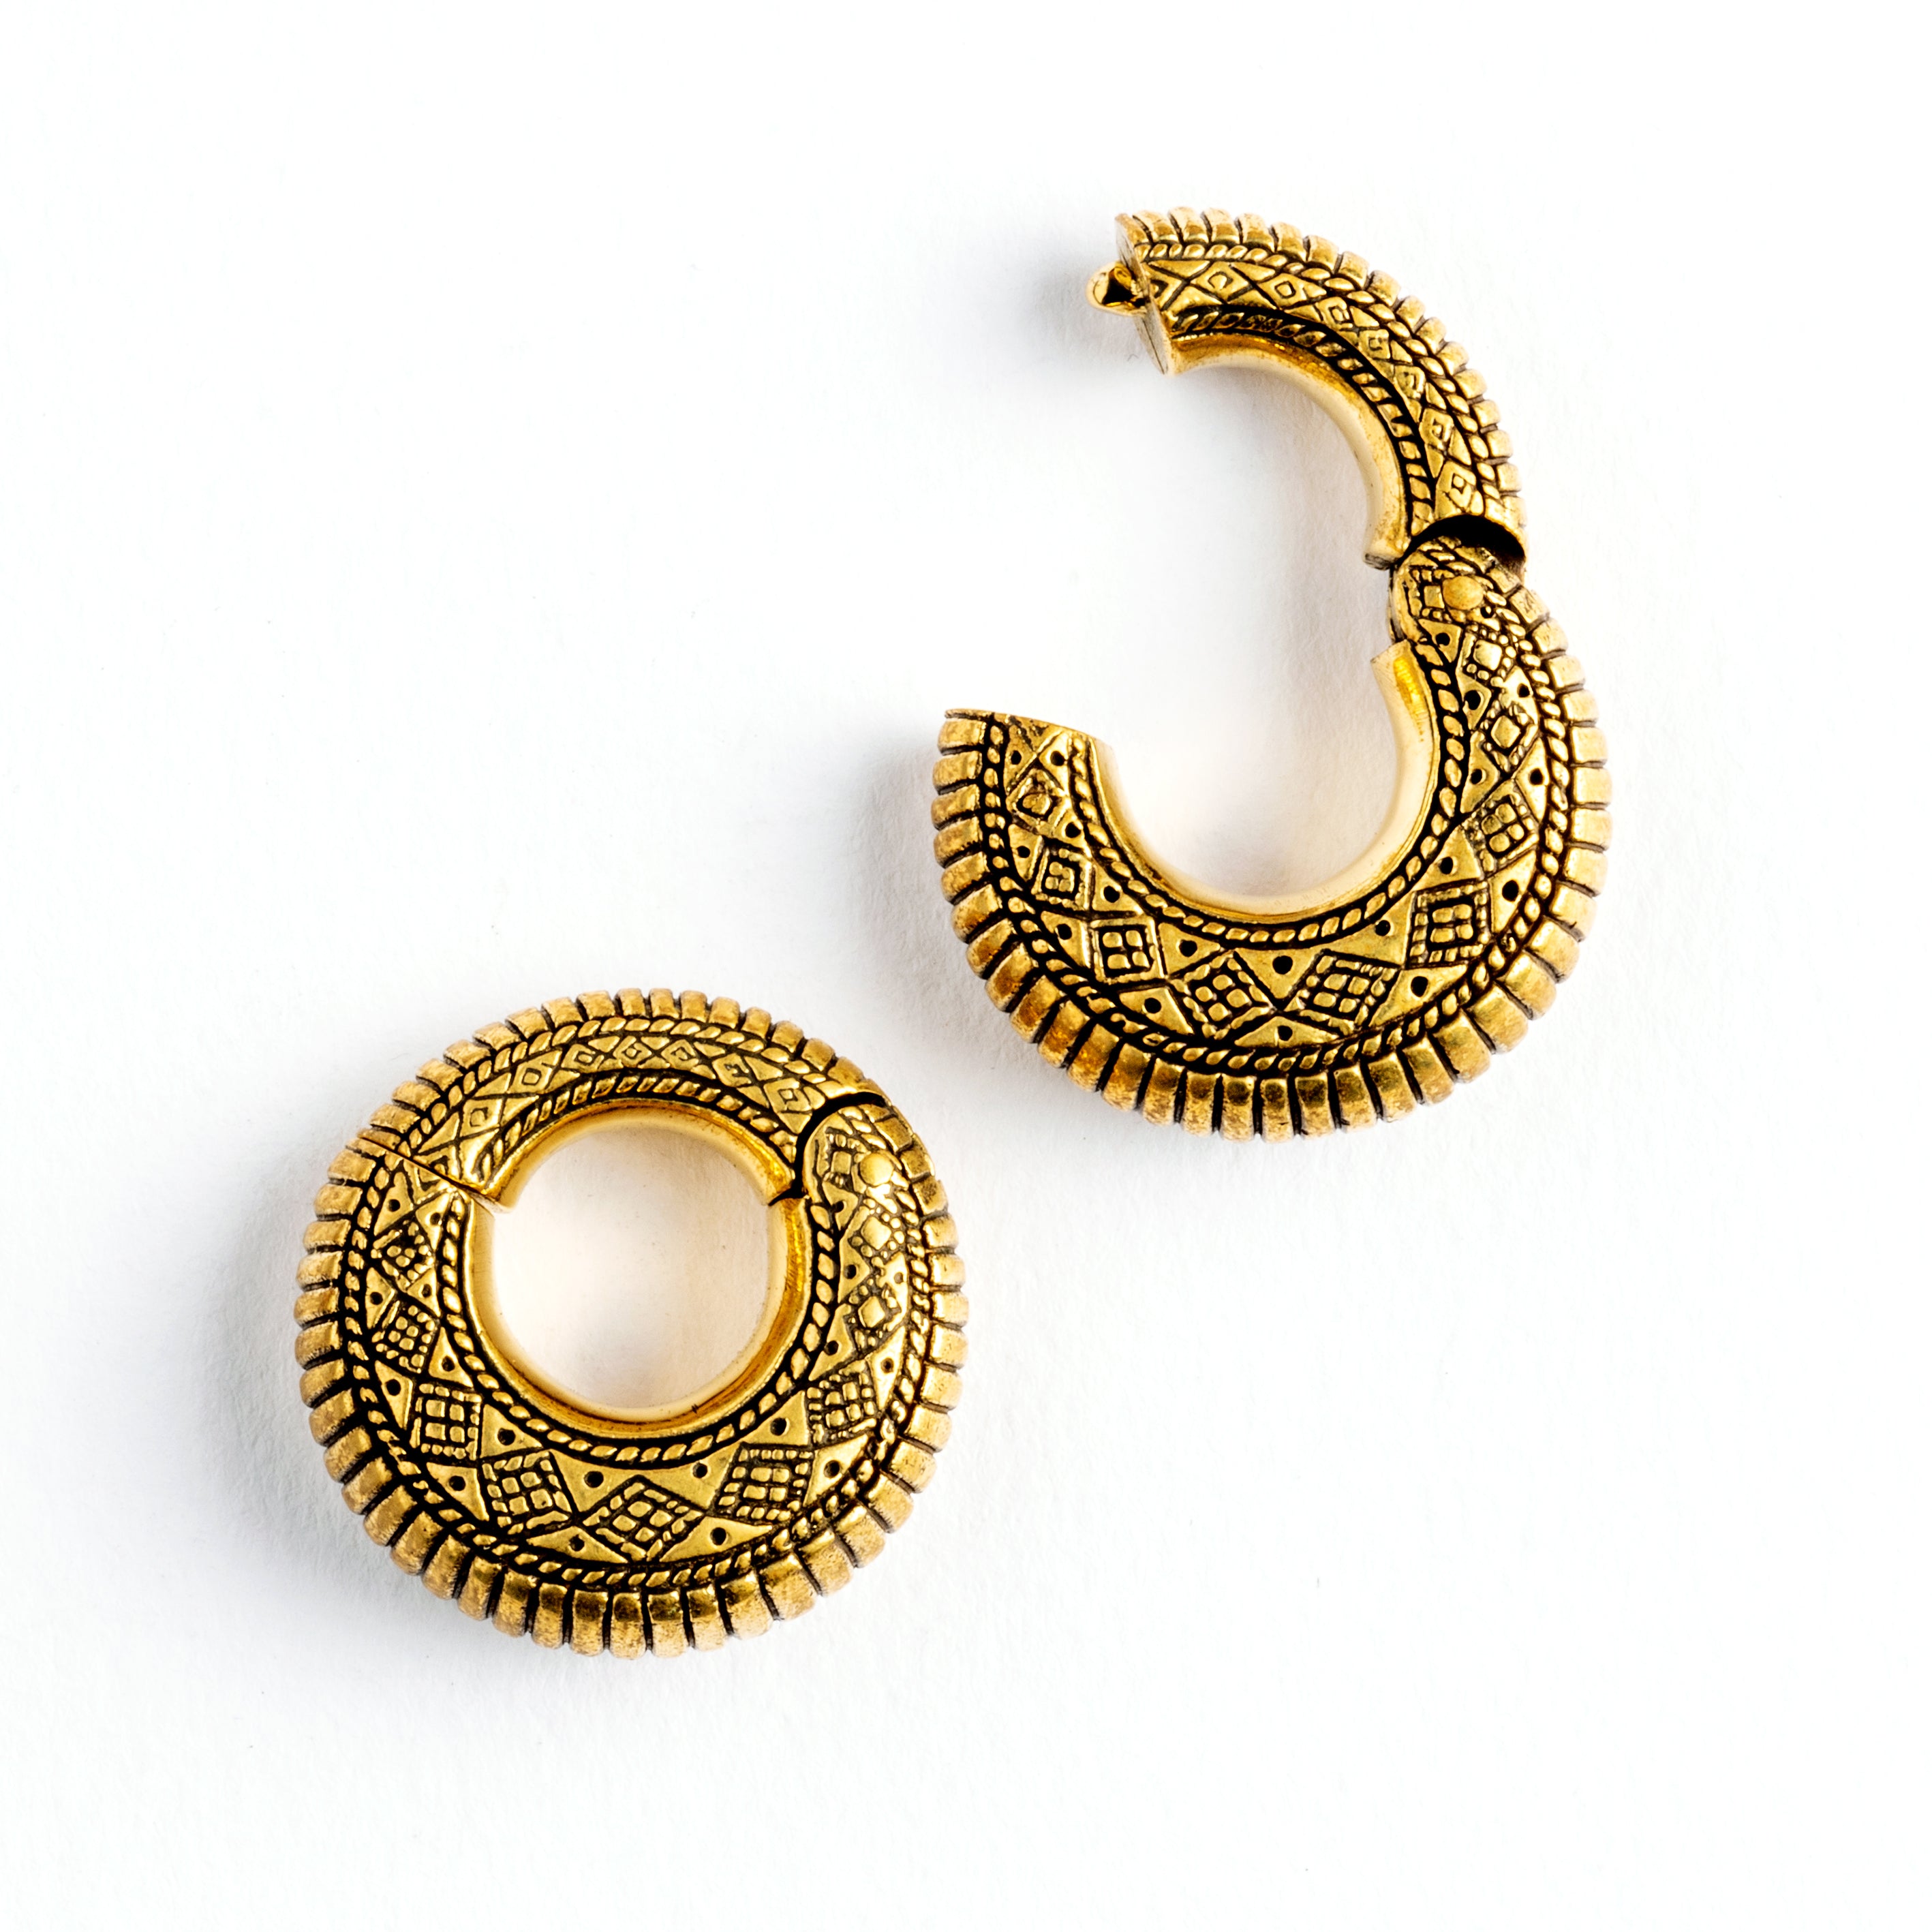 pair of gold brass ear weights hoops with geometric tribal engraved pattern frontal locking system view